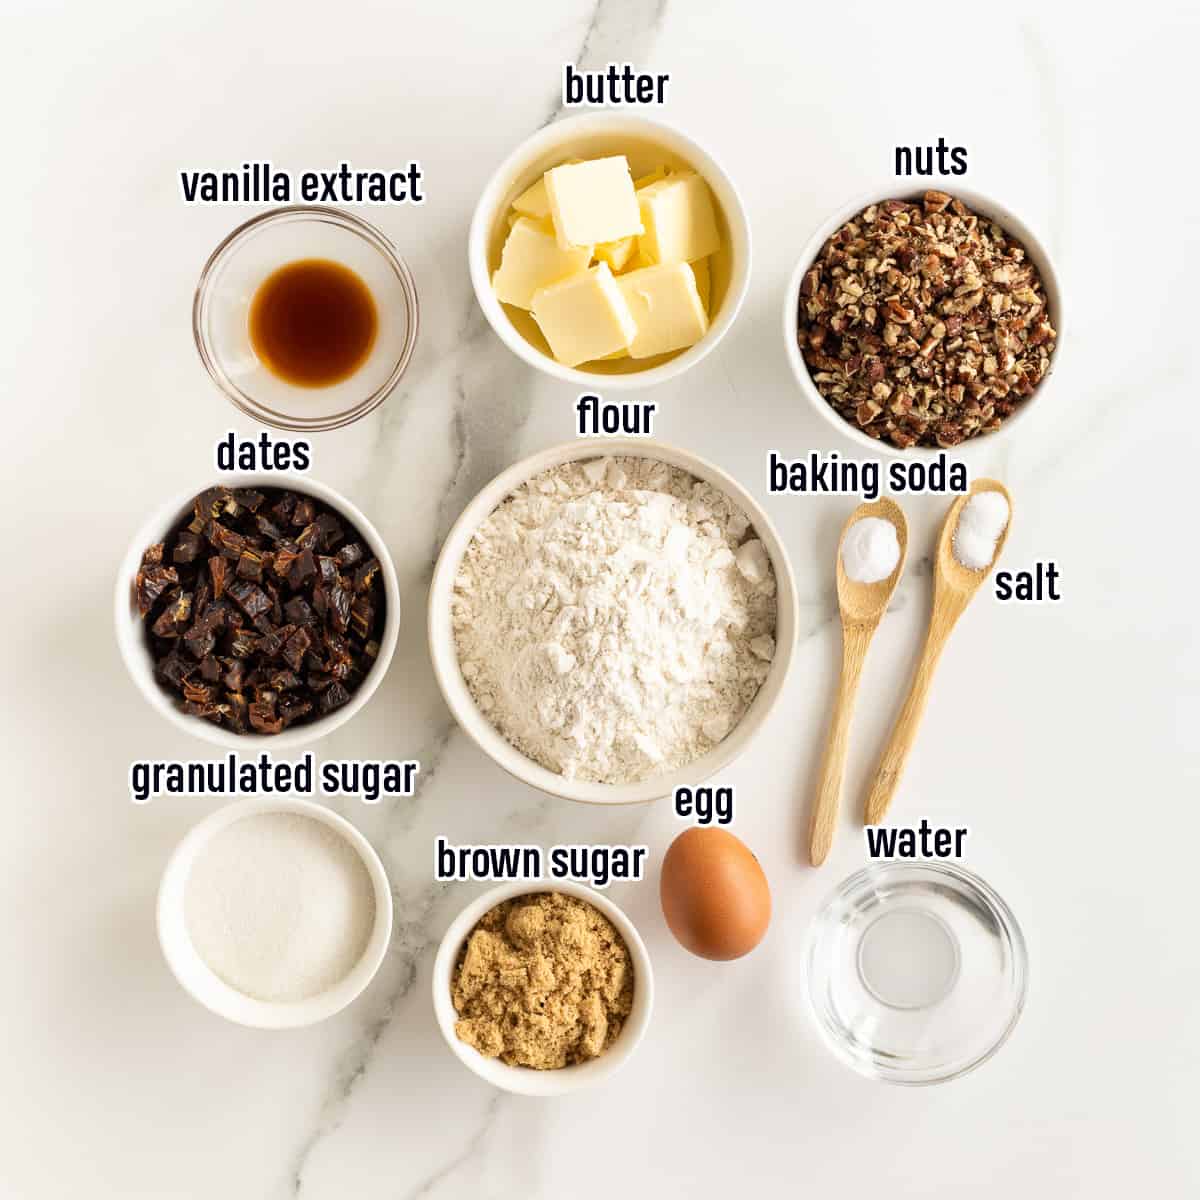 Flour, dates, nuts and other ingredients in bowls with text.